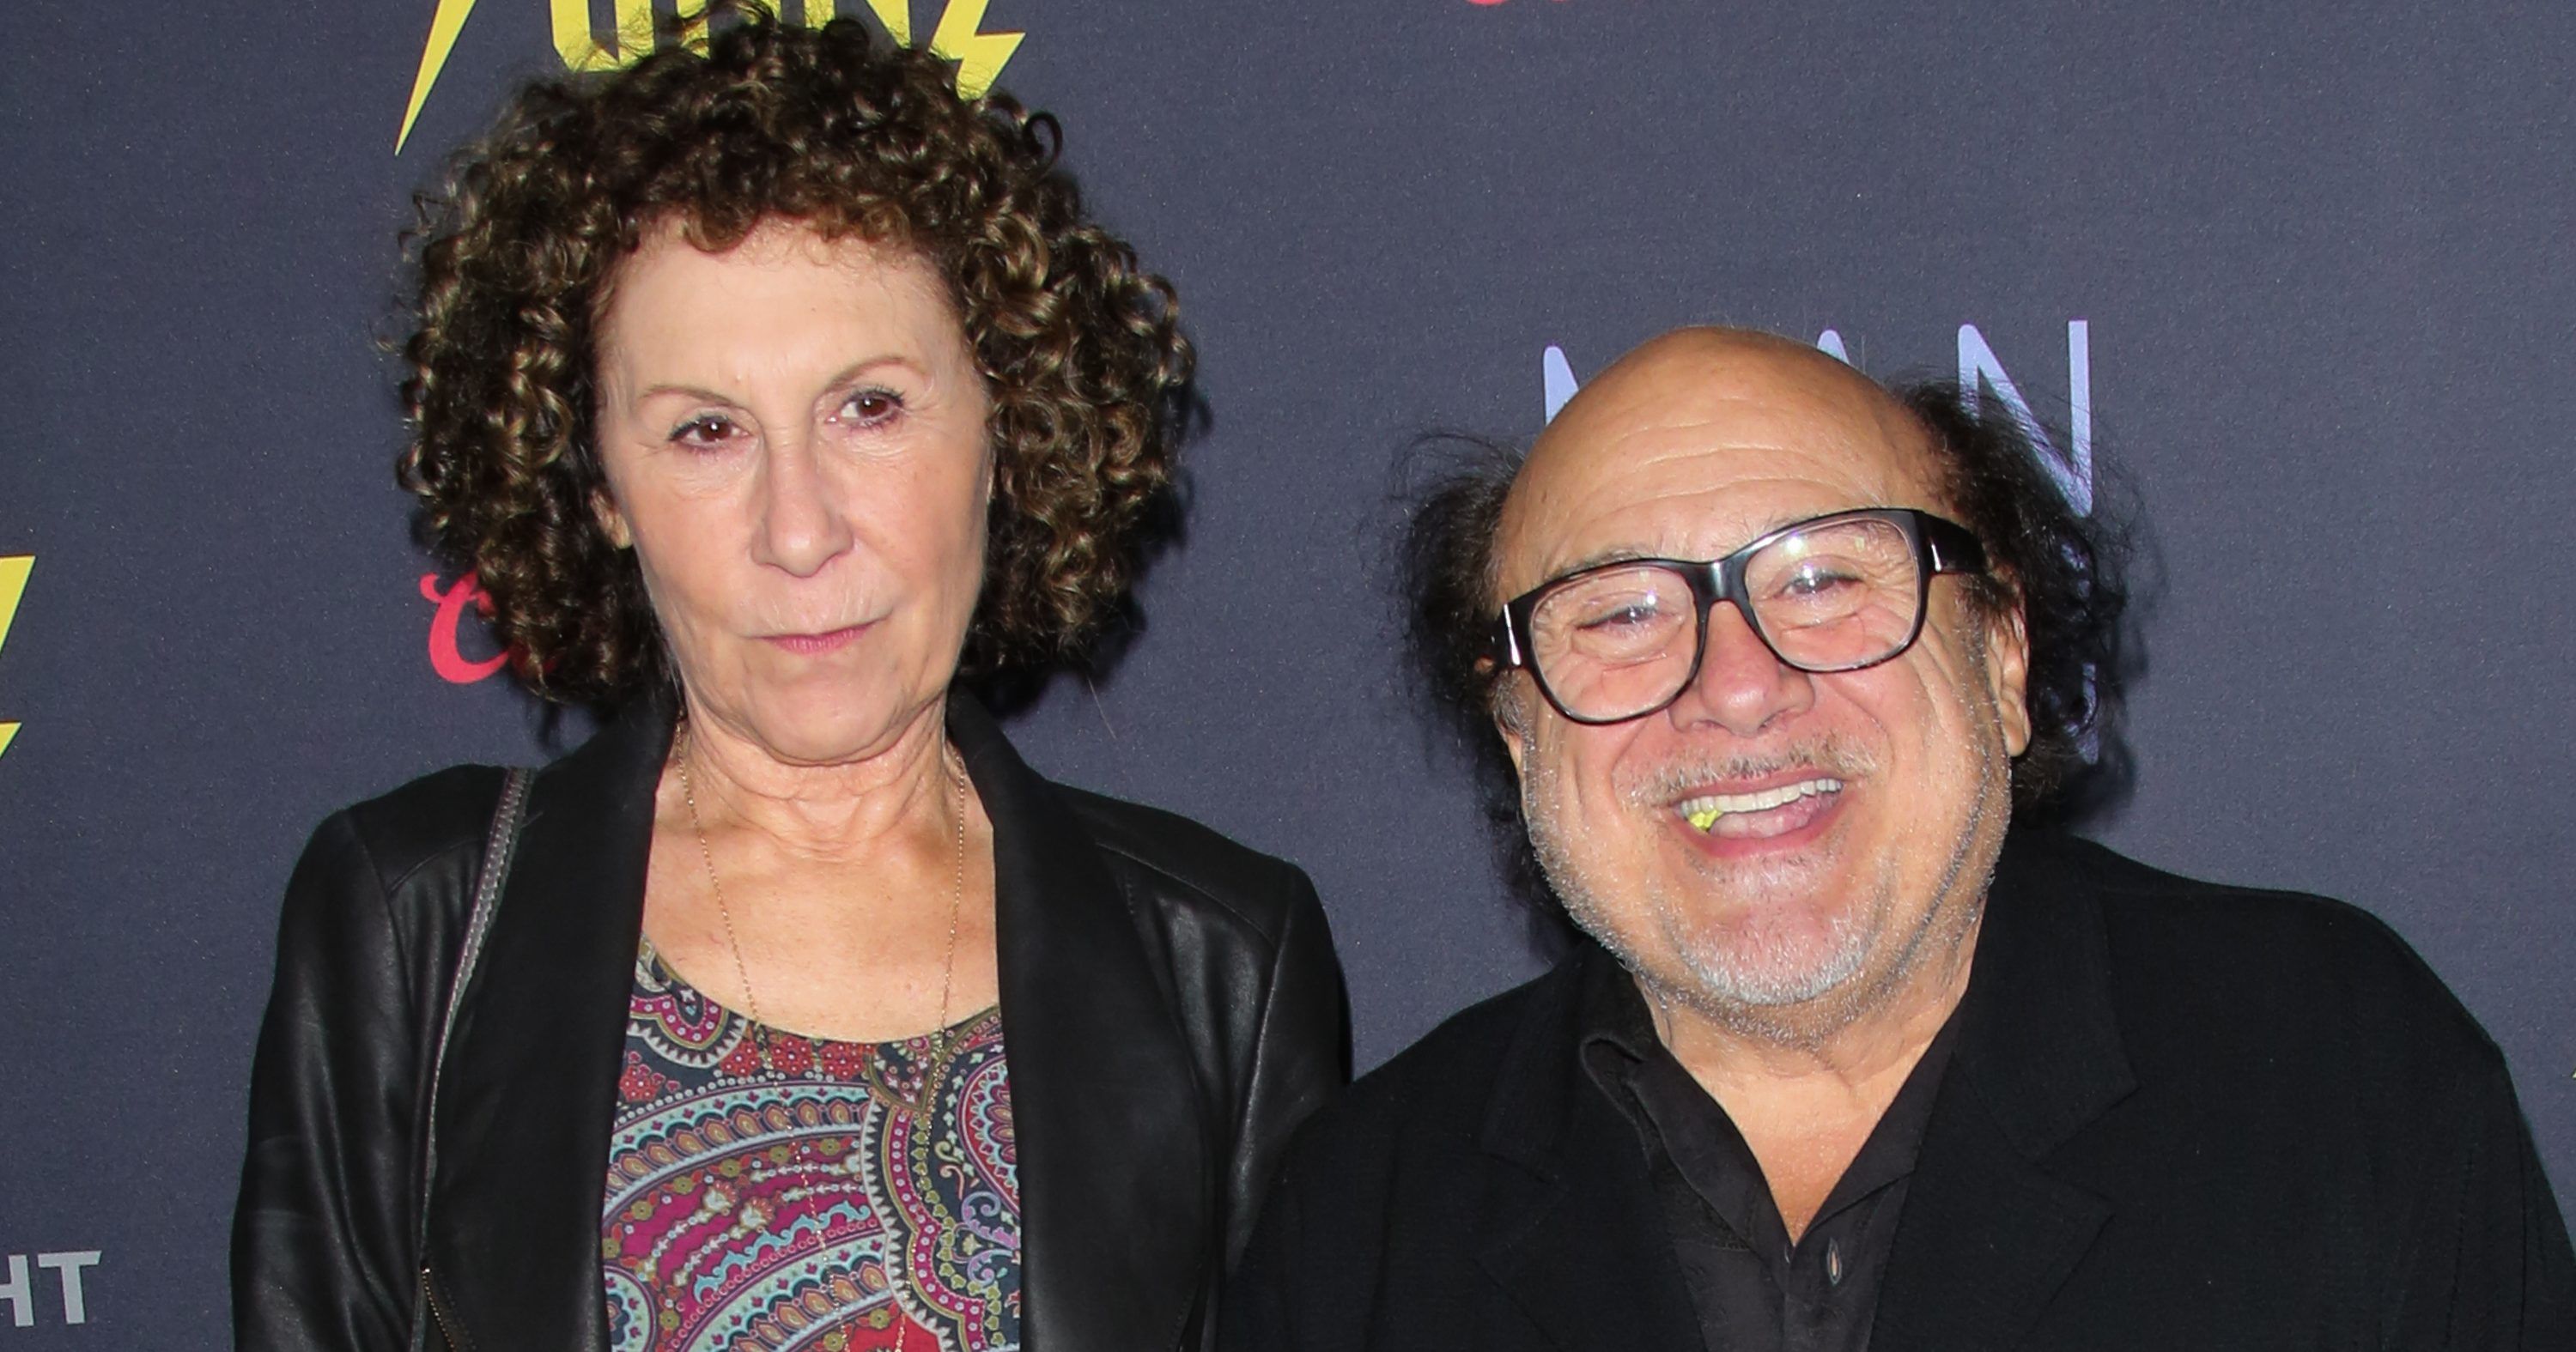 10 Interesting Facts About Danny DeVito And Rhea Perlman's Marriage Rh...